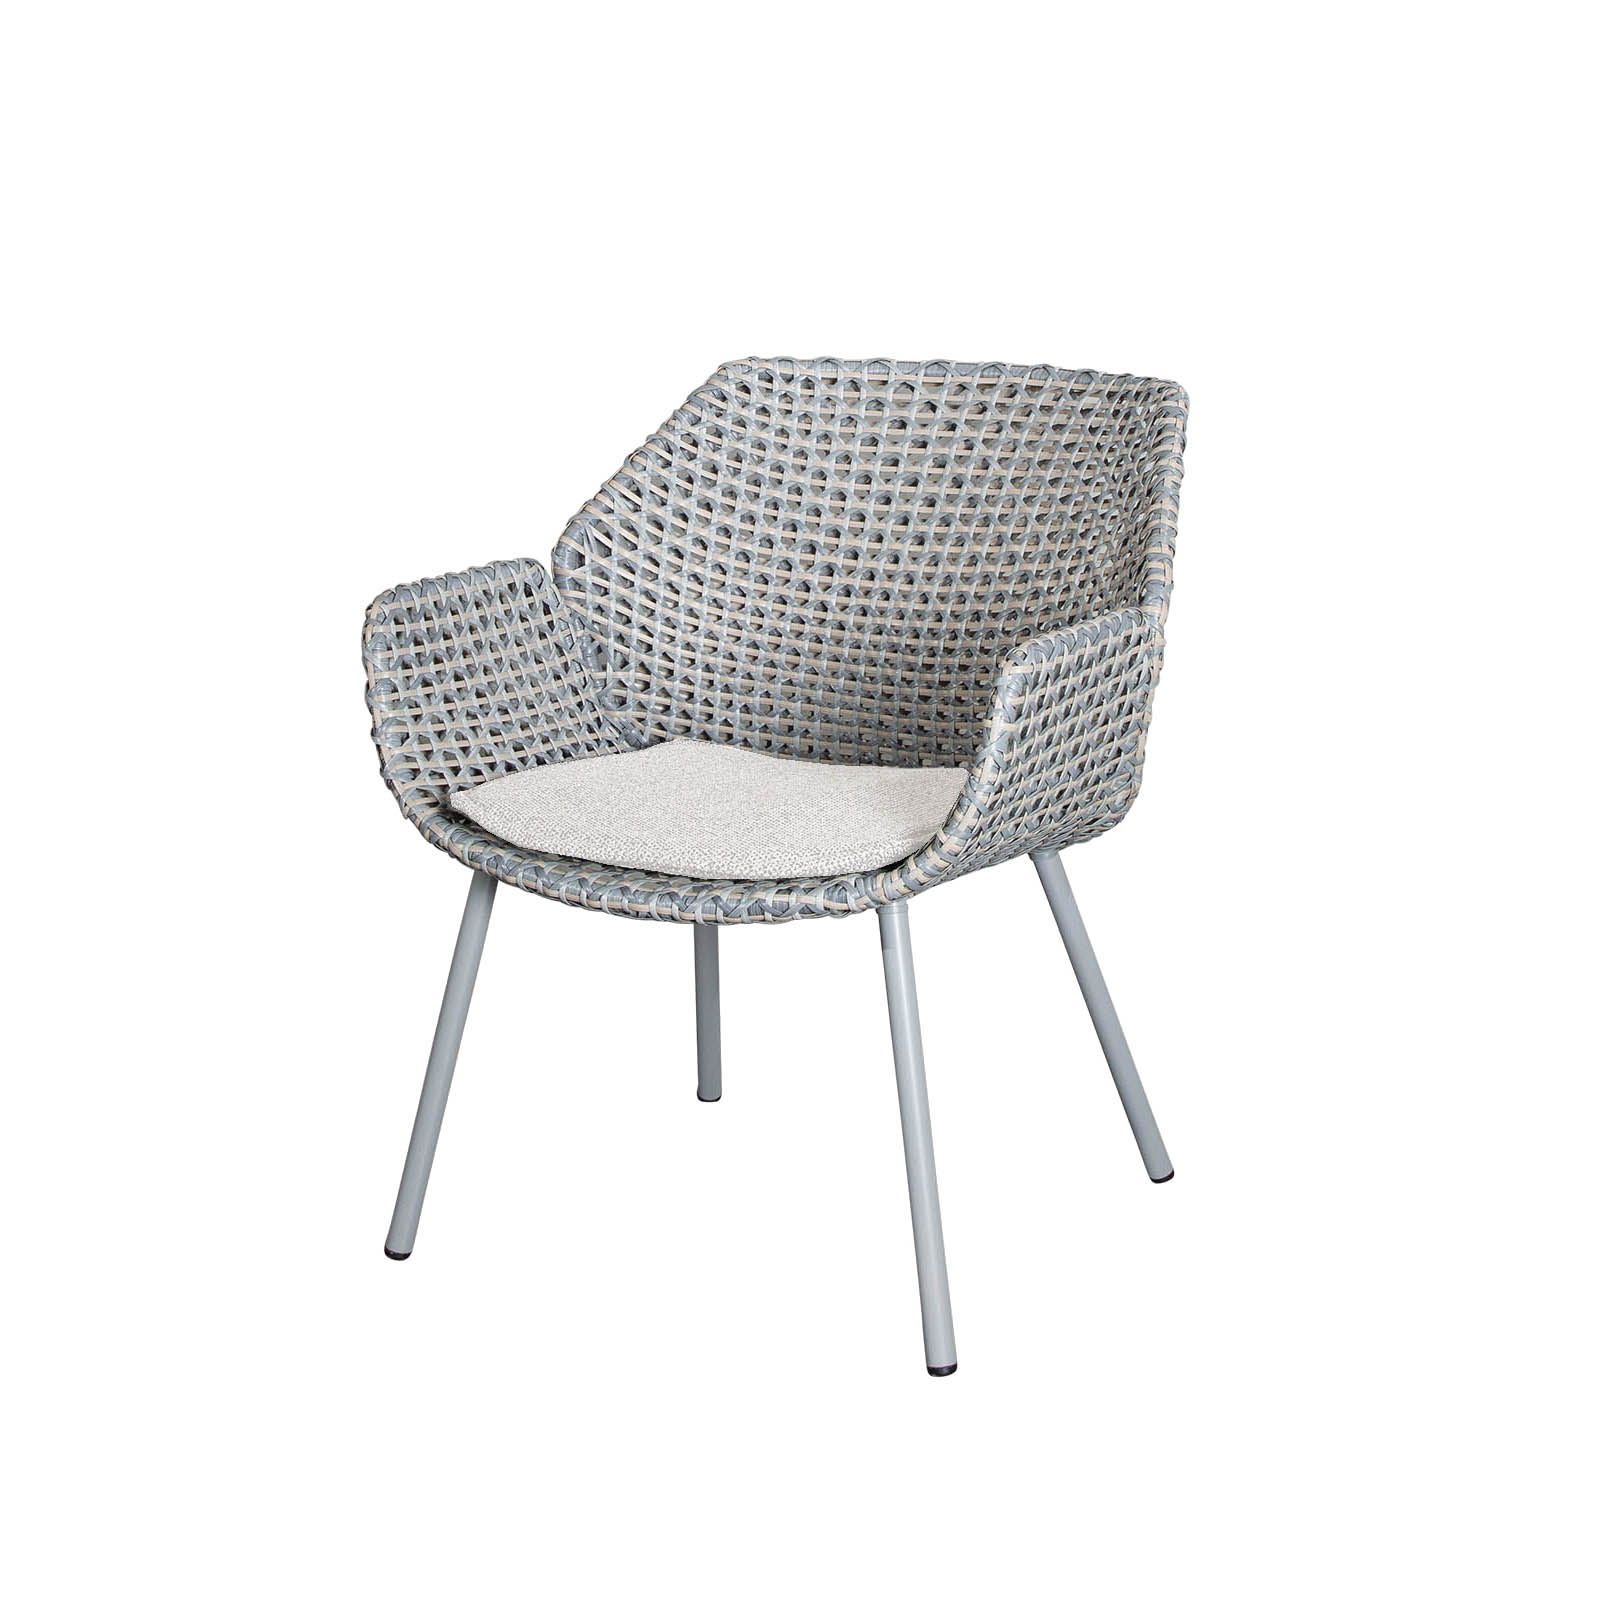 Vibe Loungesessel aus Cane-line Weave in Light Grey mit Kissen aus Cane-line Wove in Light Brown